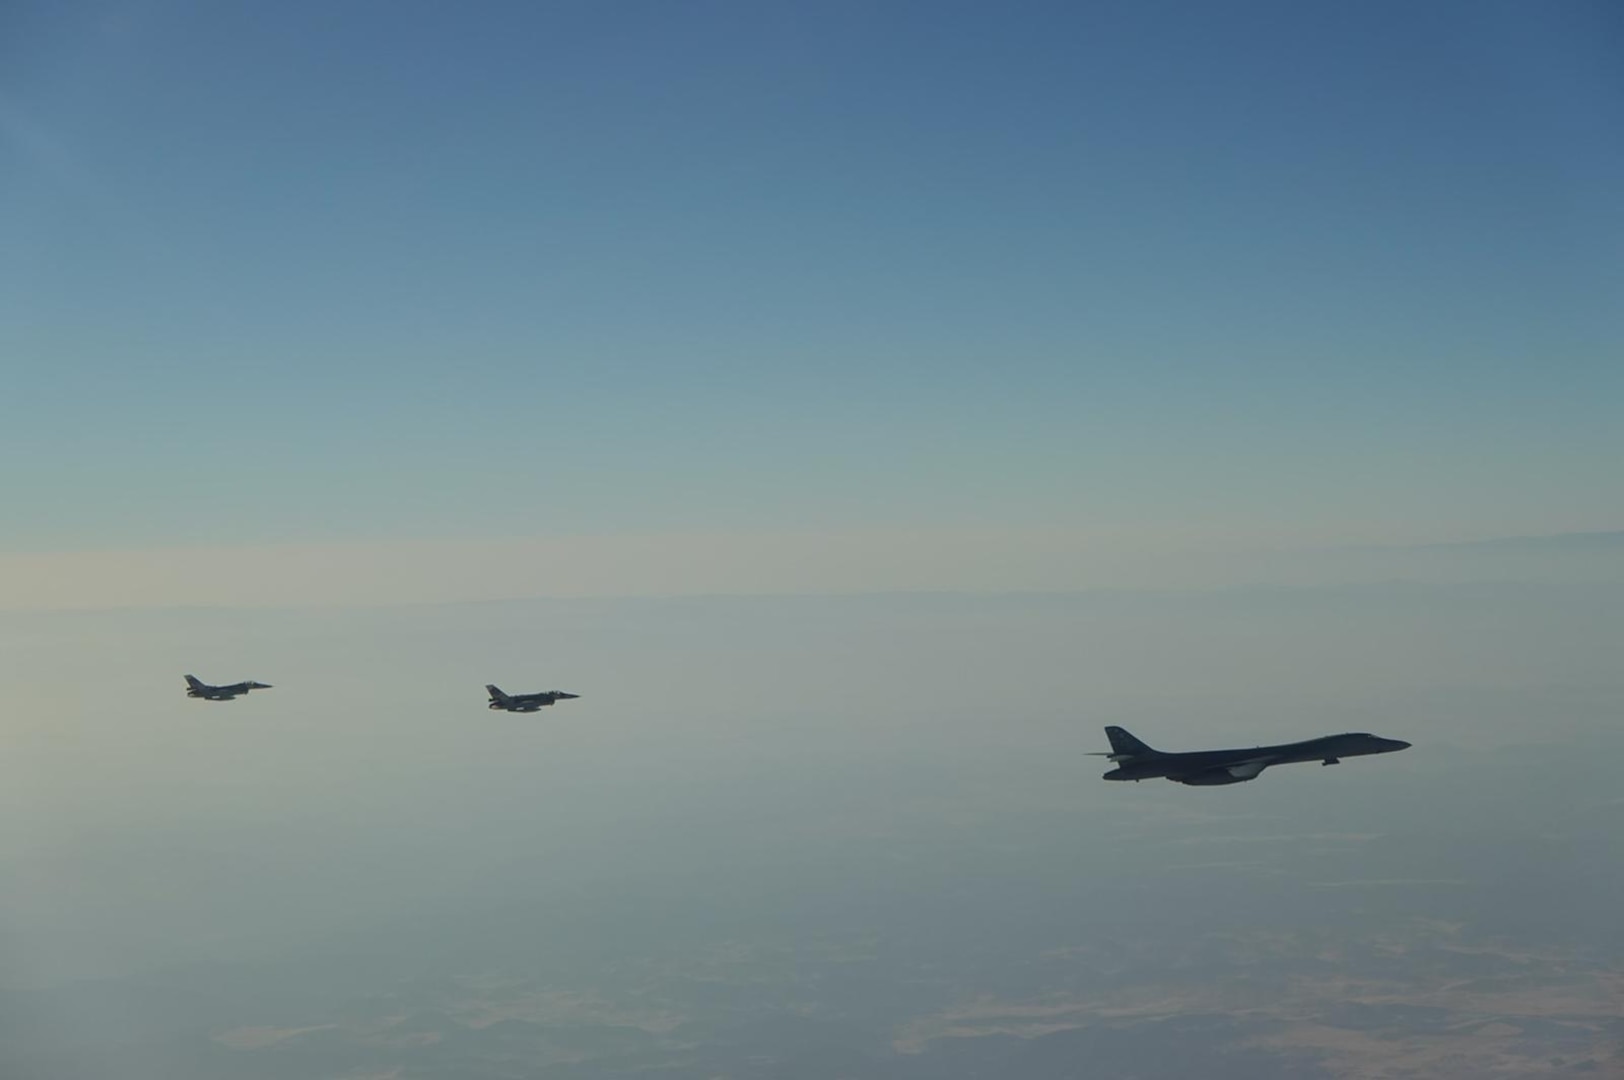 B-1B Lancer bombers from Dyess Air Force Base, Texas, fly with Royal Moroccan Air Force F-16 and F-5 aircraft off the coast of Morocco, June 30, 2022, in support of African Lion 2022. African Lion 2022 (AL22) is U.S. Africa Command's largest, premier, joint, annual exercise hosted by Morocco, Ghana, Senegal and Tunisia, June 6 - 30. More than 7,500 participants from 28 nations and NATO train together with a focus on enhancing readiness for U.S. and partner nation forces. AL22 is a joint all-domain, multi component, and multinational exercise, employing a full array of mission capabilities with the goal to strengthen interoperability among participants and set the theater for strategic access.

(U.S. Air Force Courtesy Photo)